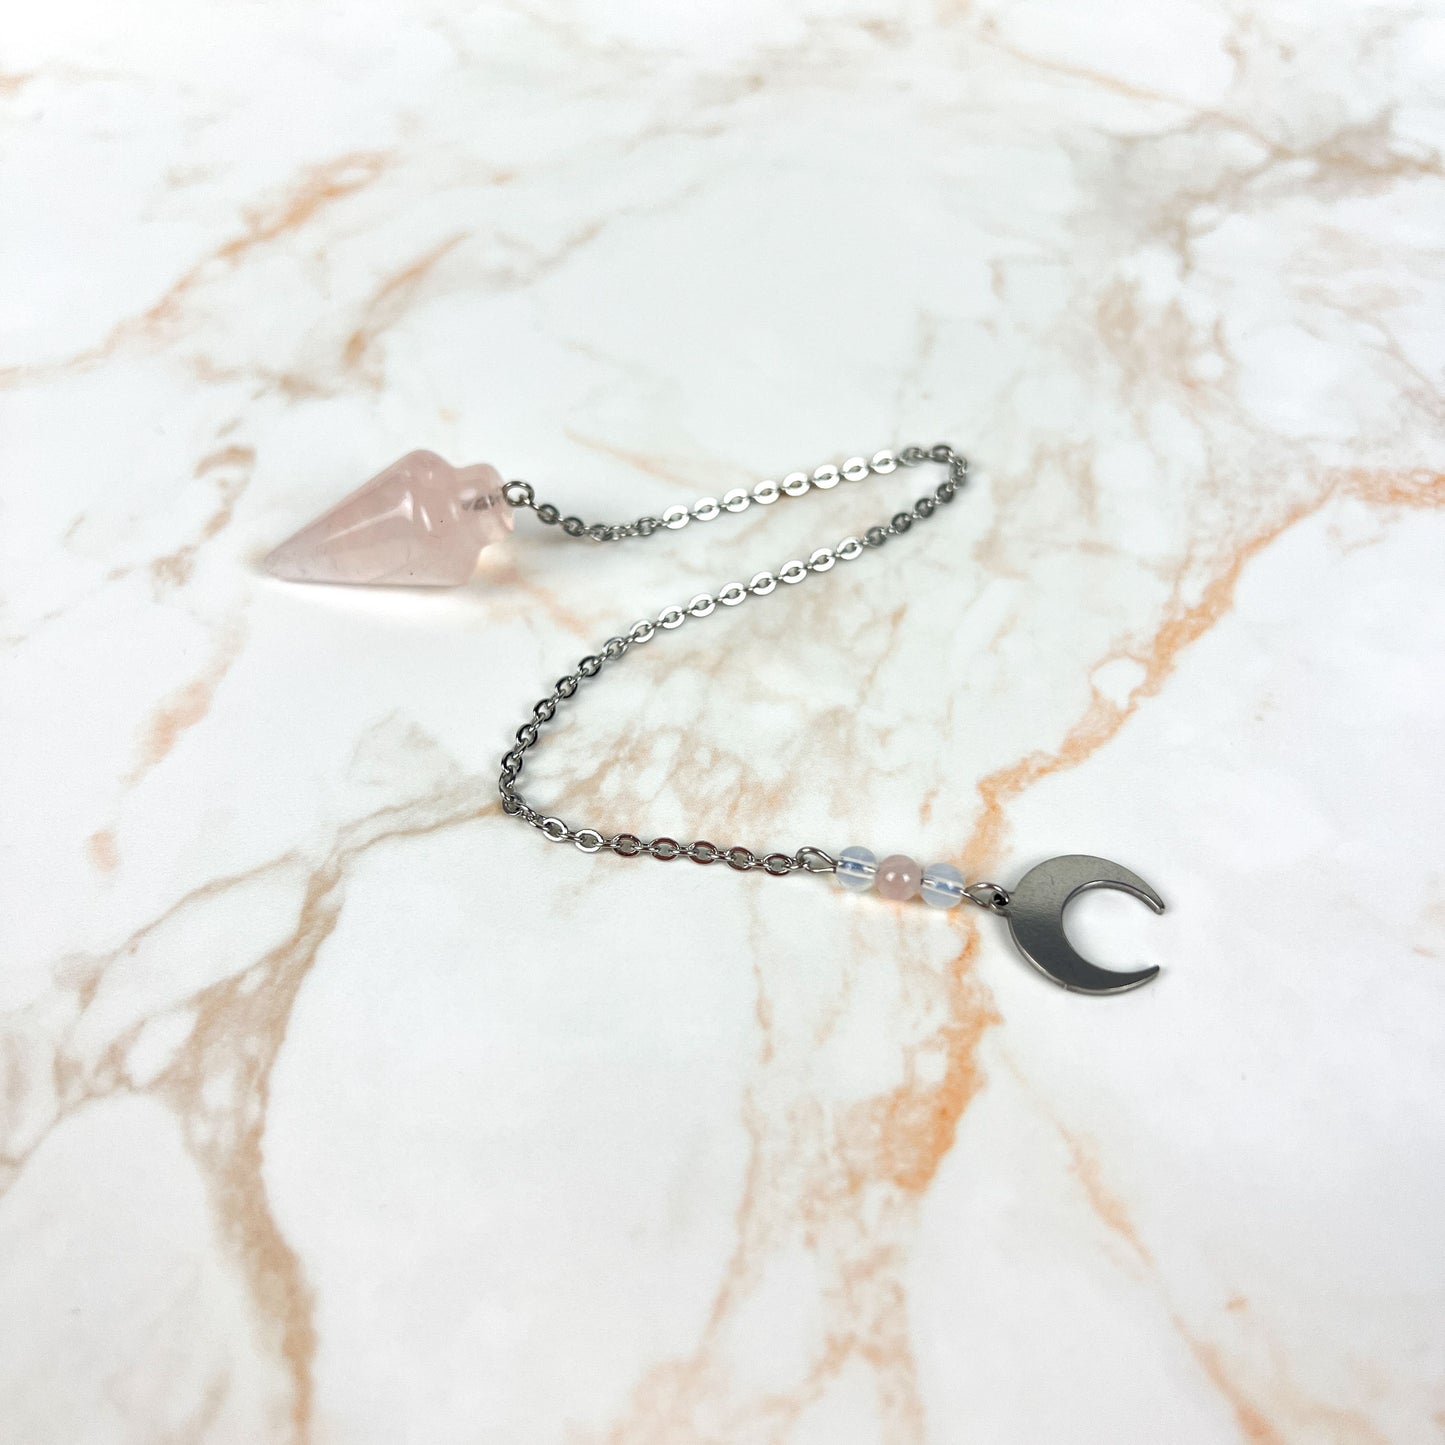 Rose quartz and opalite dowsing pendulum, pocket size, stainless steel, horn charm Baguette Magick